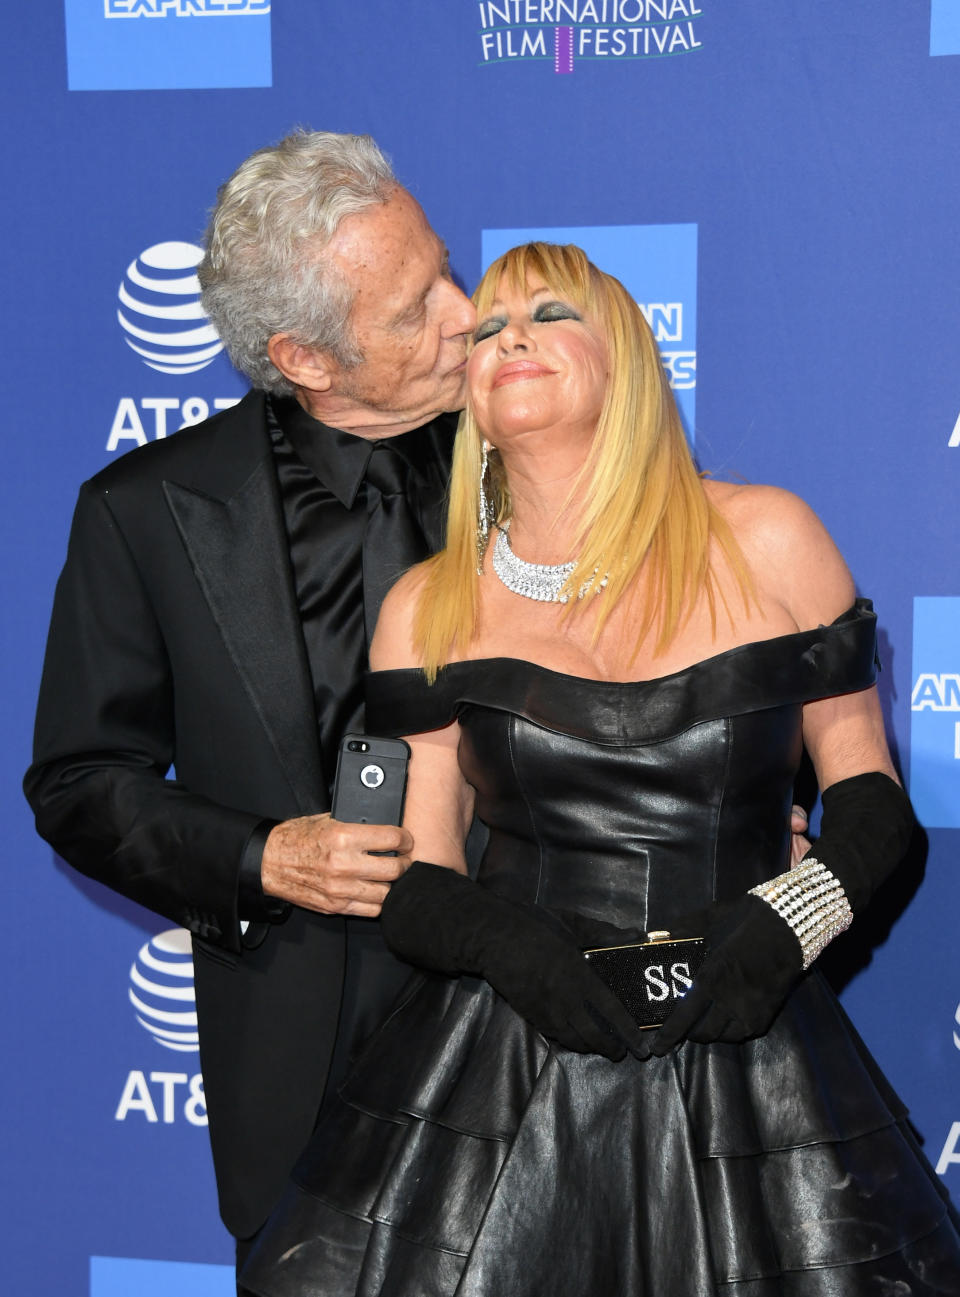 Hamel and Somers (pictured in January) have been married since 1977. (Photo: Jon Kopaloff/Getty Images)